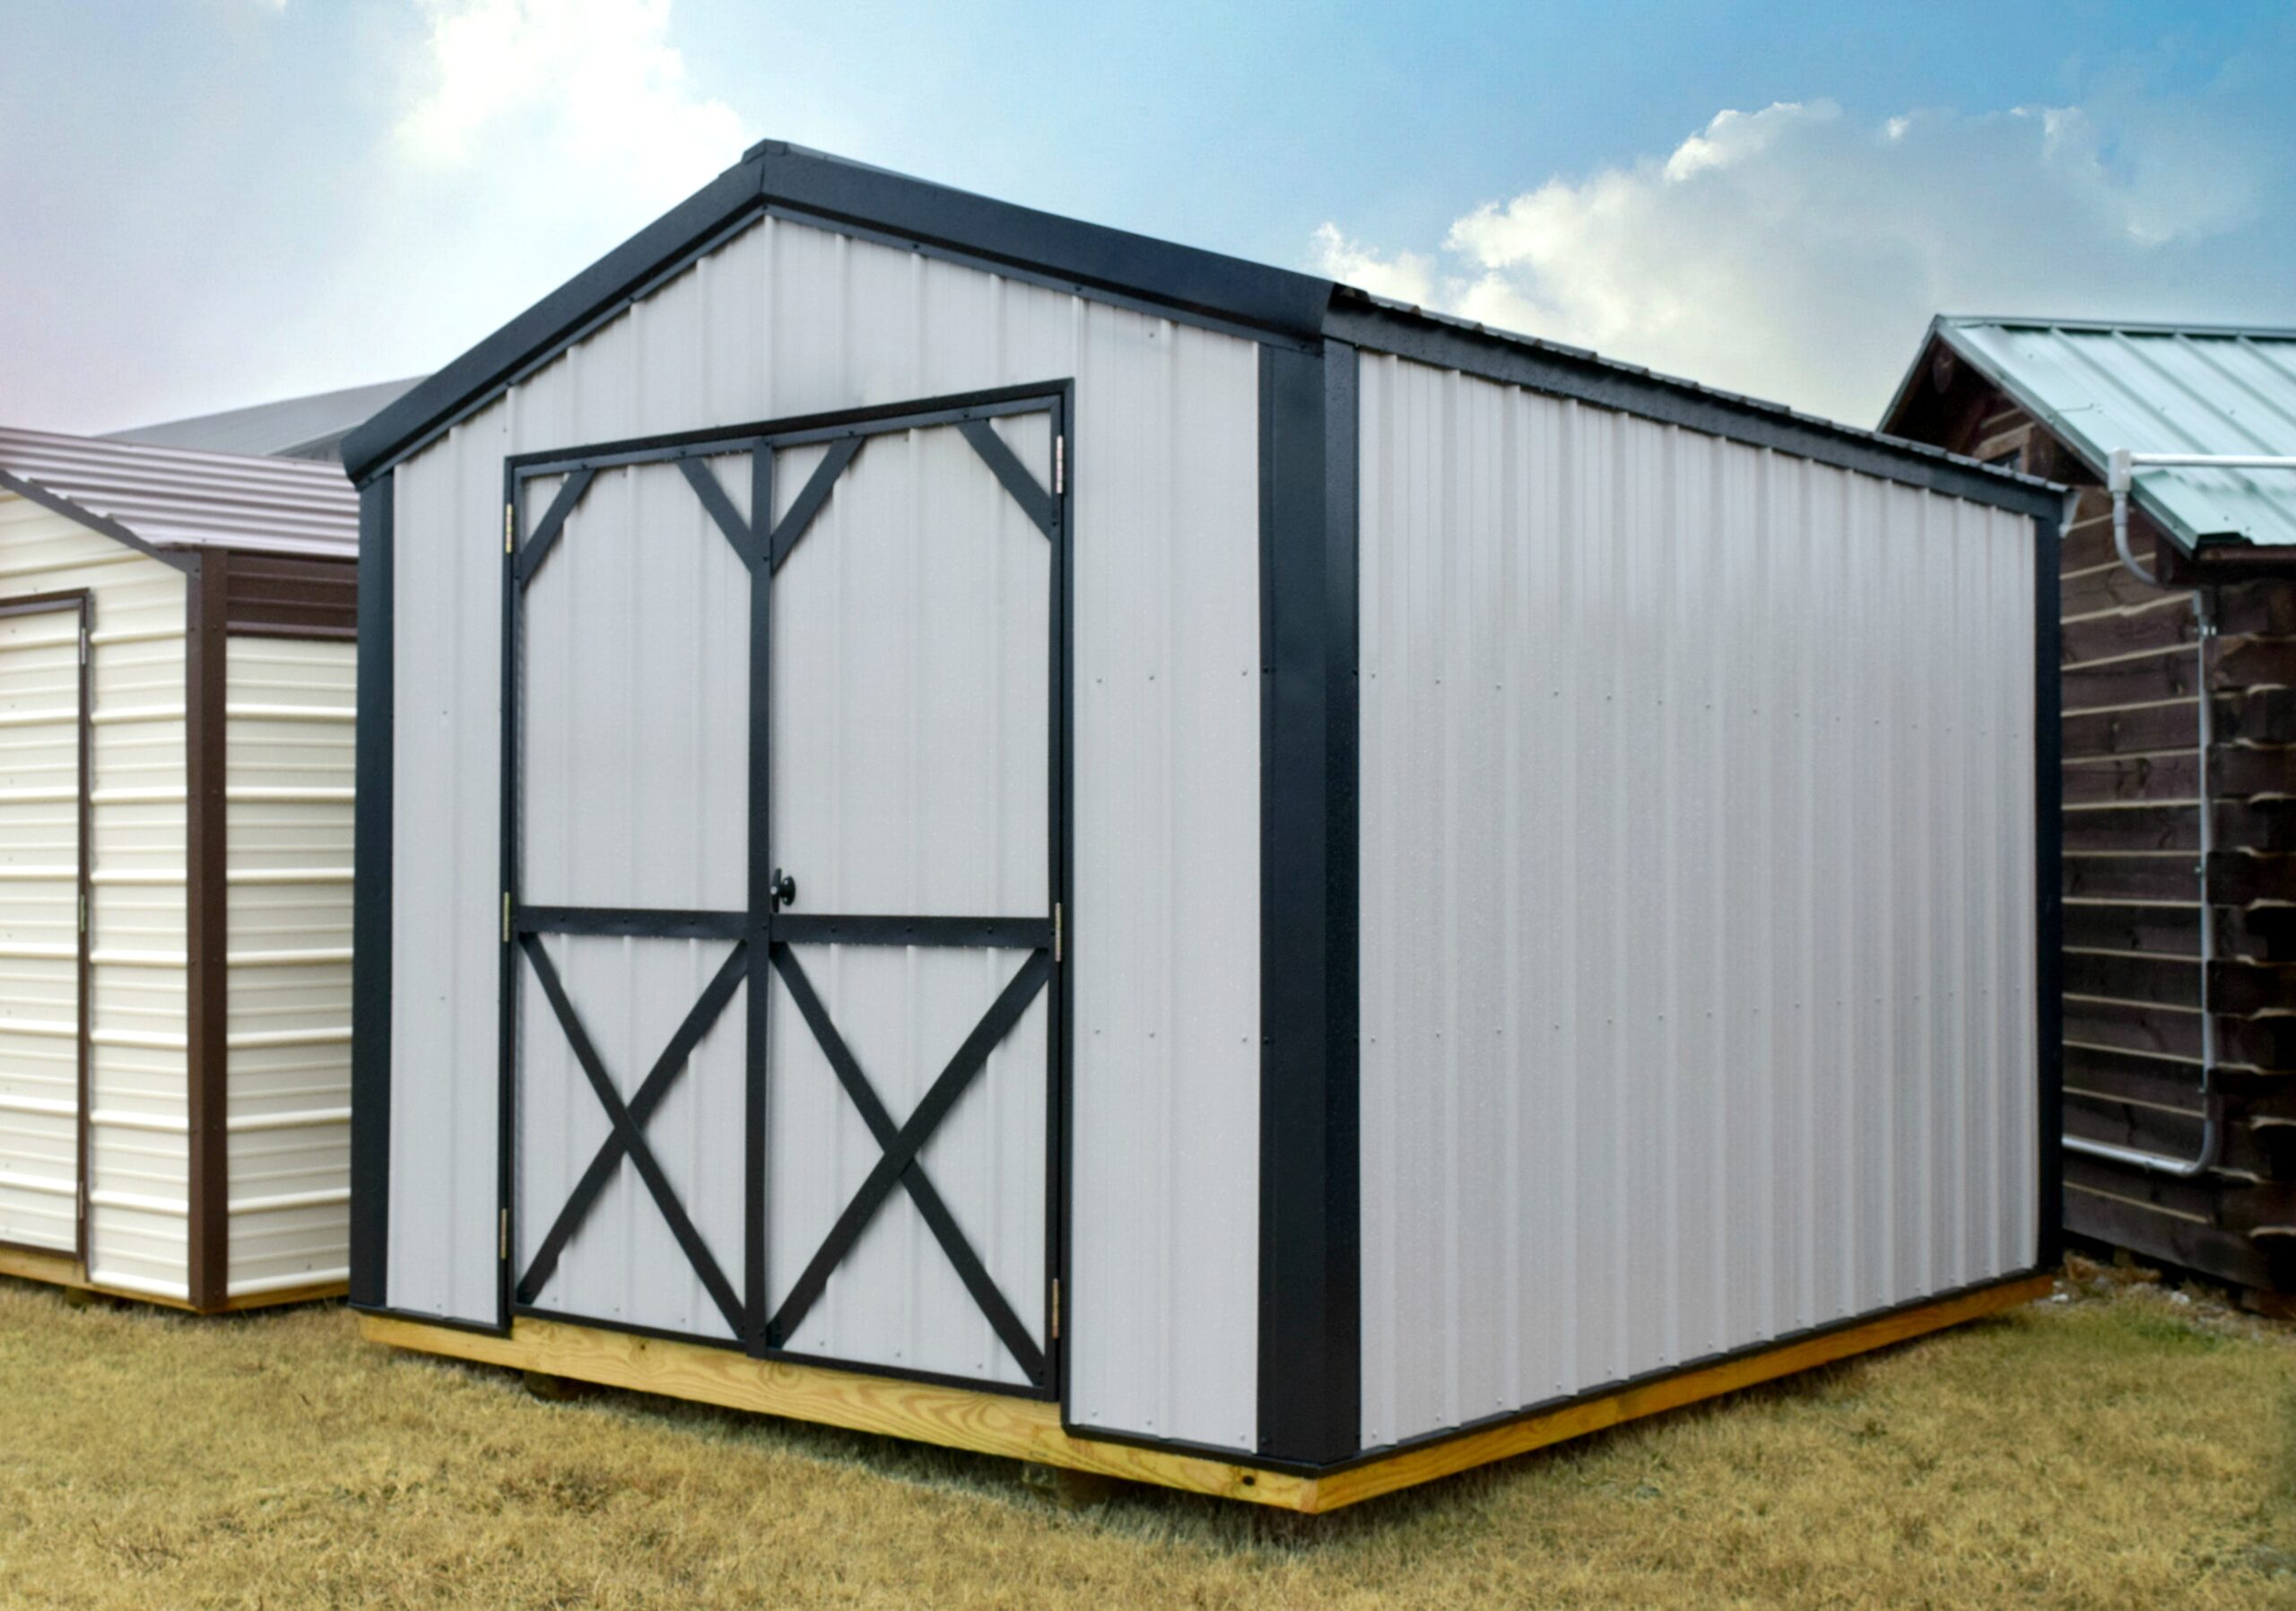 Gray metal shed with black trim and roof